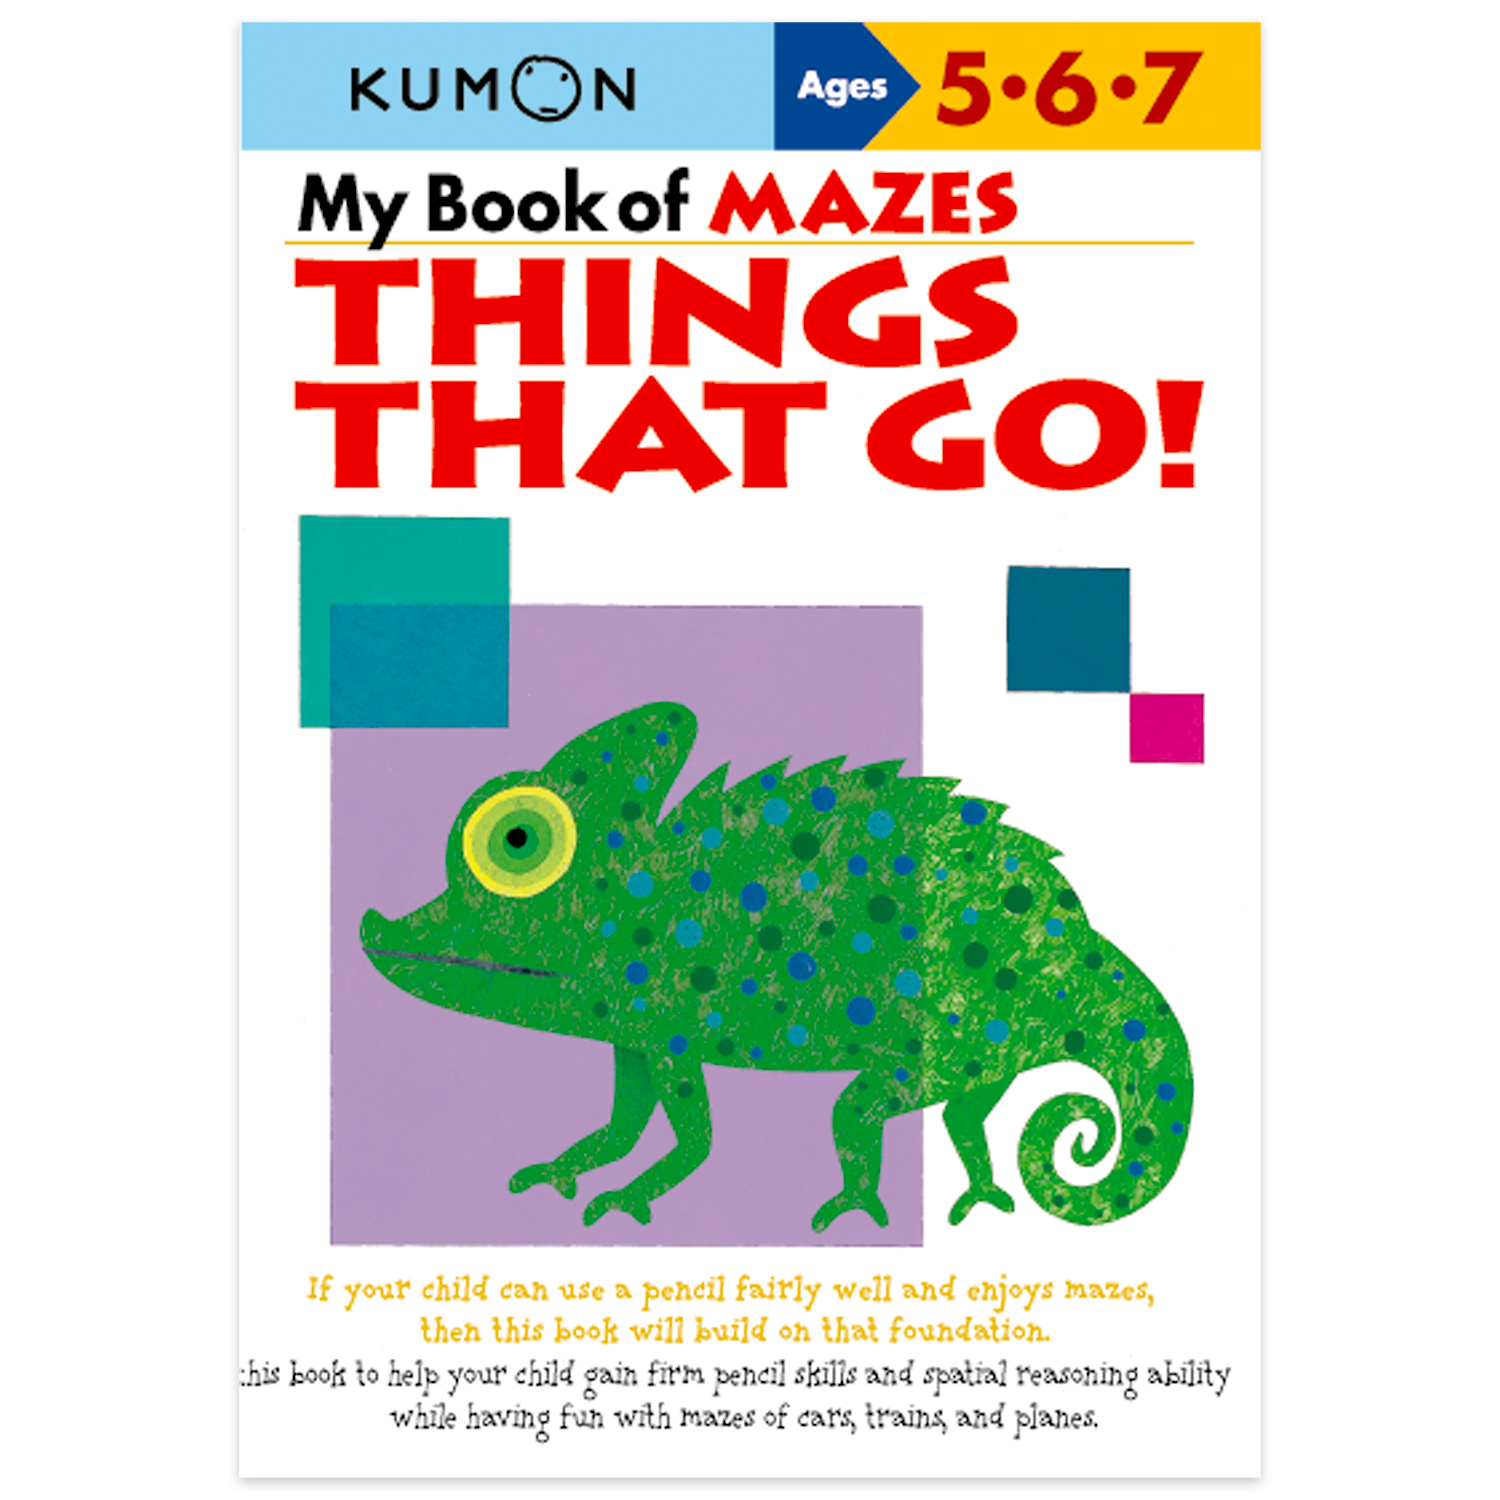 my book of mazes: things that go!